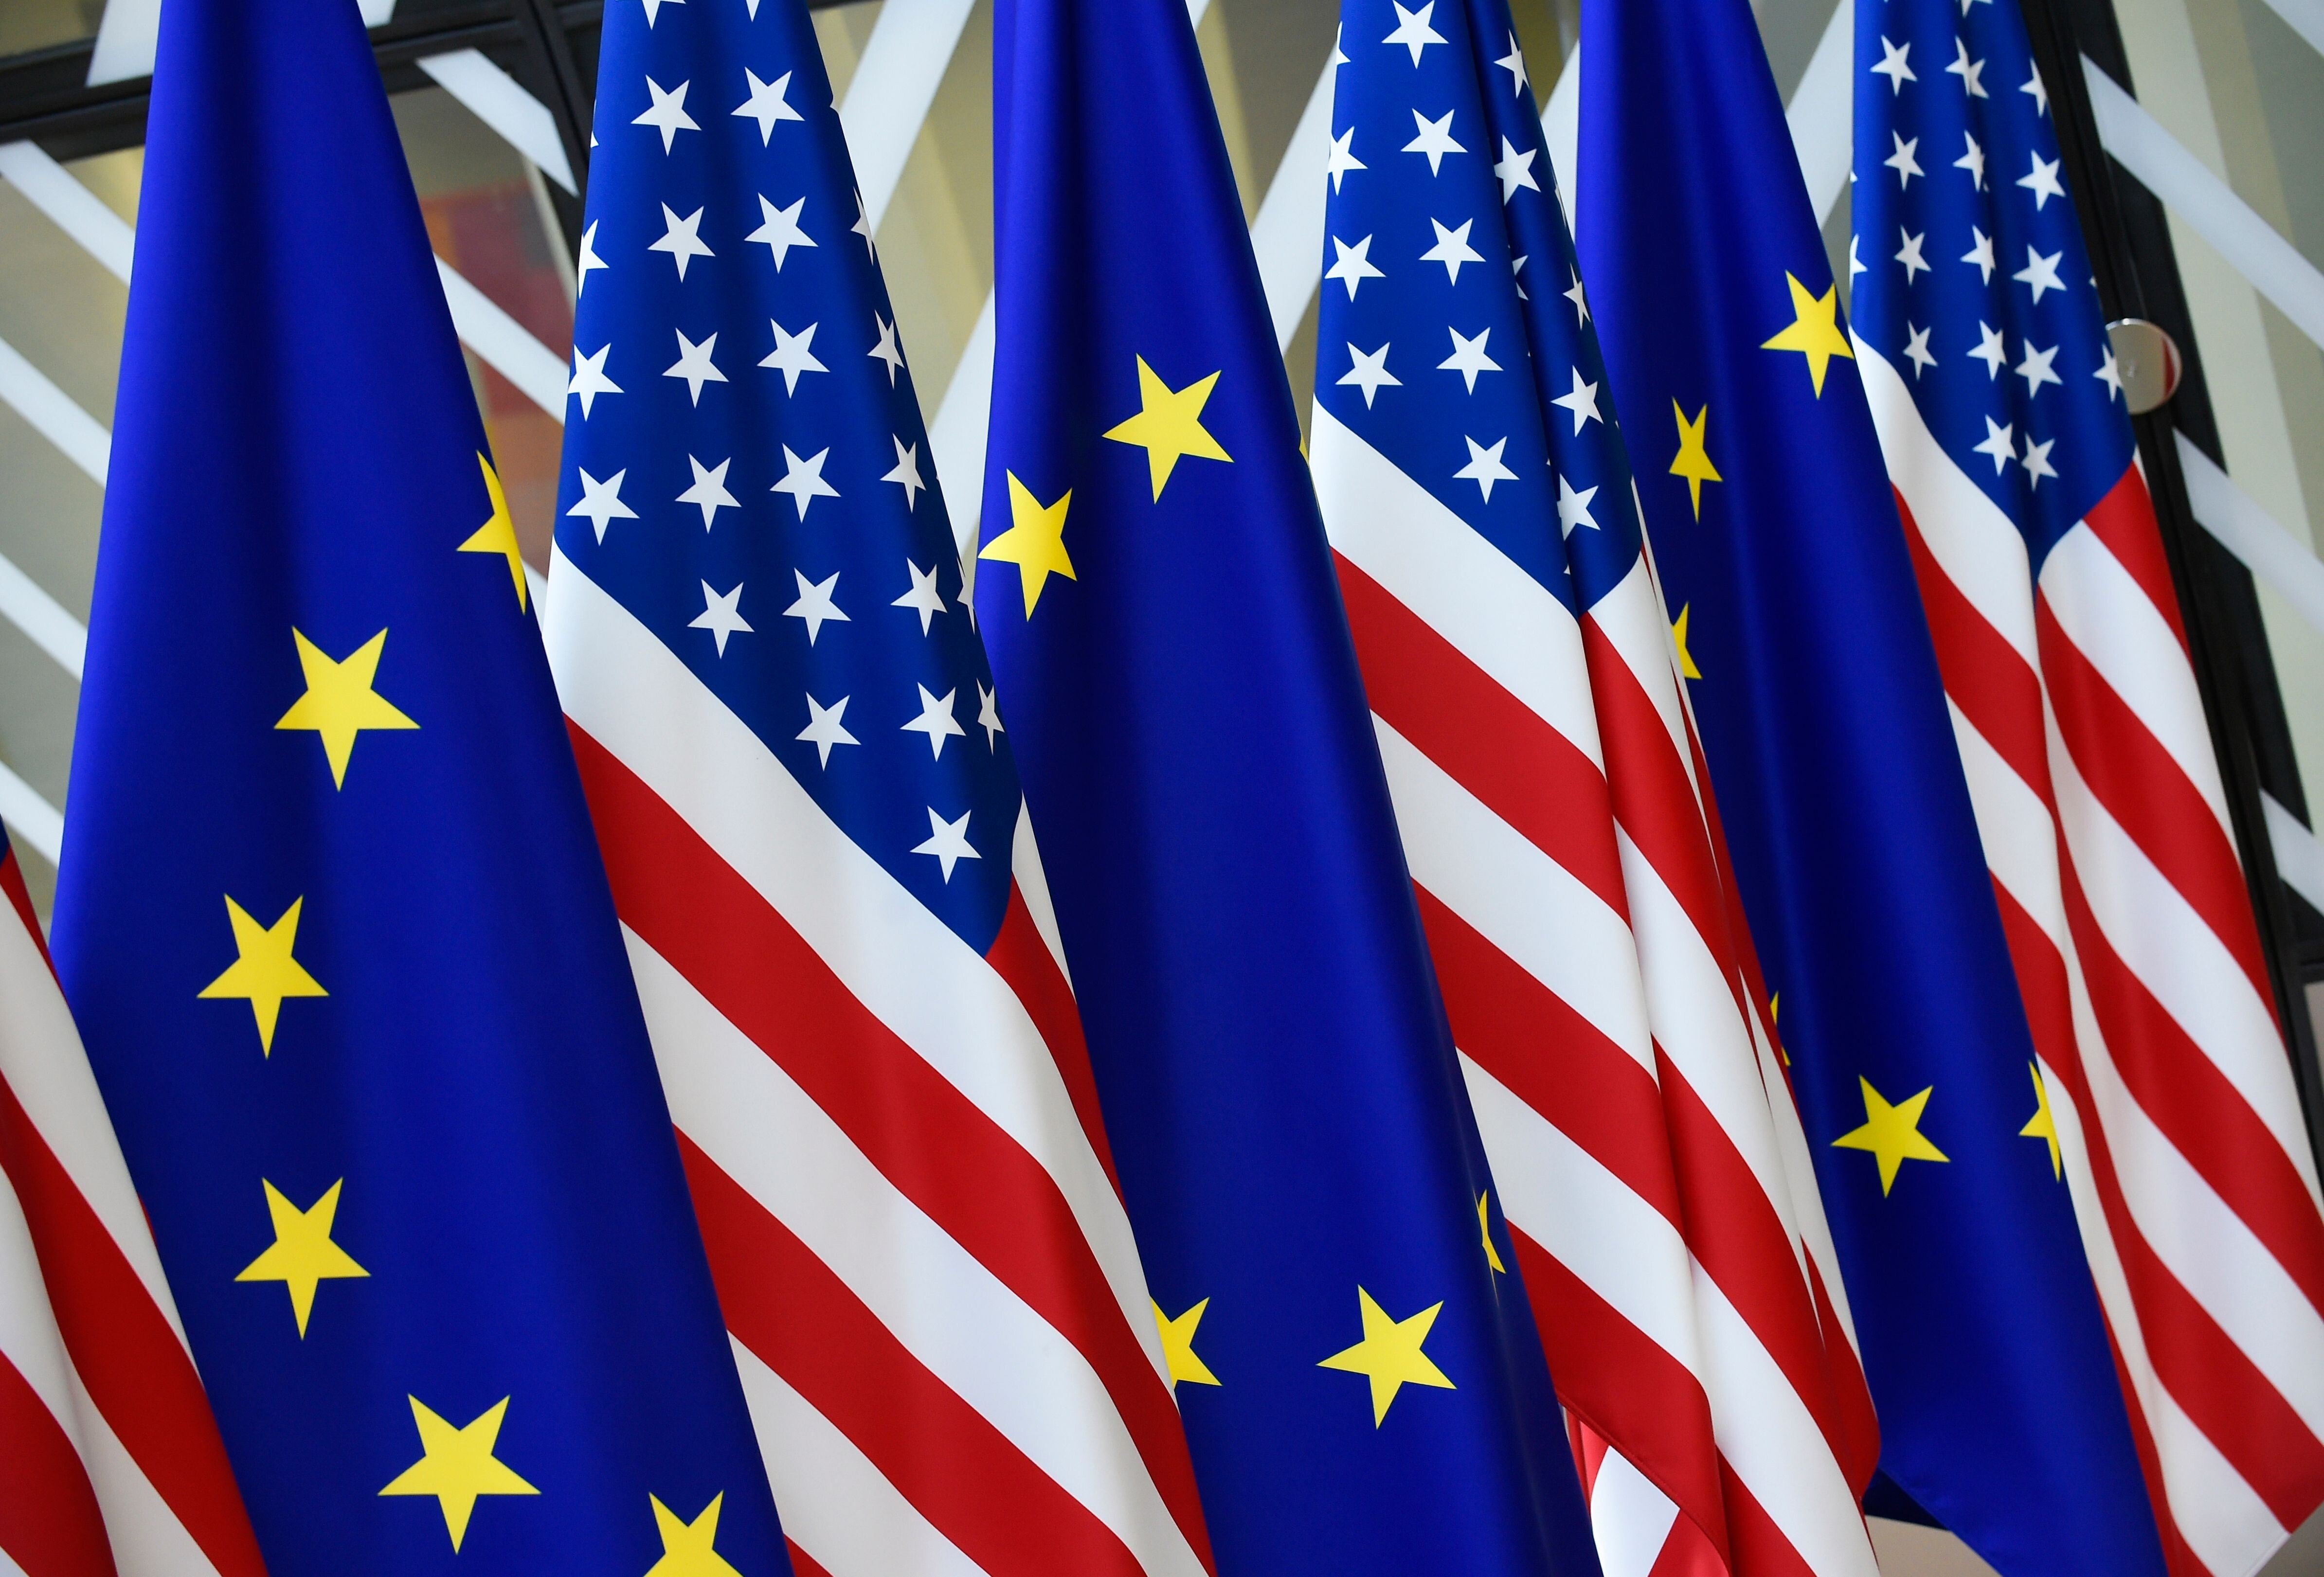 US and EU flags are on display in the EU headquarters in 2017. While there is broad alignment between the US and the EU on China trade issues, there are differences which could complicate the establishment of an effective coalition. Photo: AFP